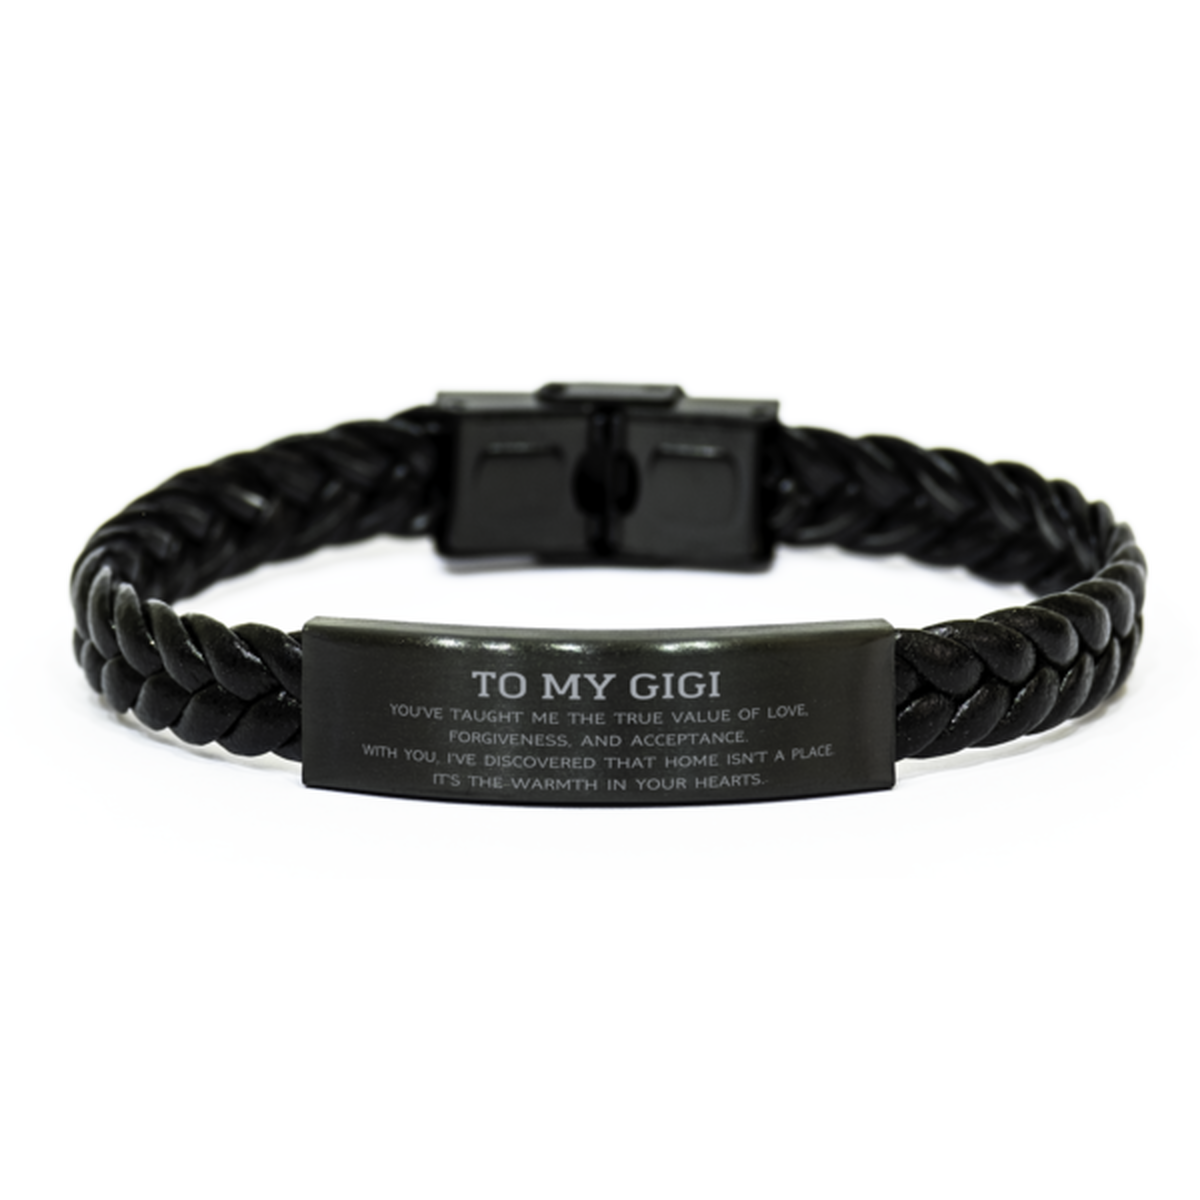 To My Gigi Gifts, You've taught me the true value of love, Thank You Gifts For Gigi, Birthday Braided Leather Bracelet For Gigi